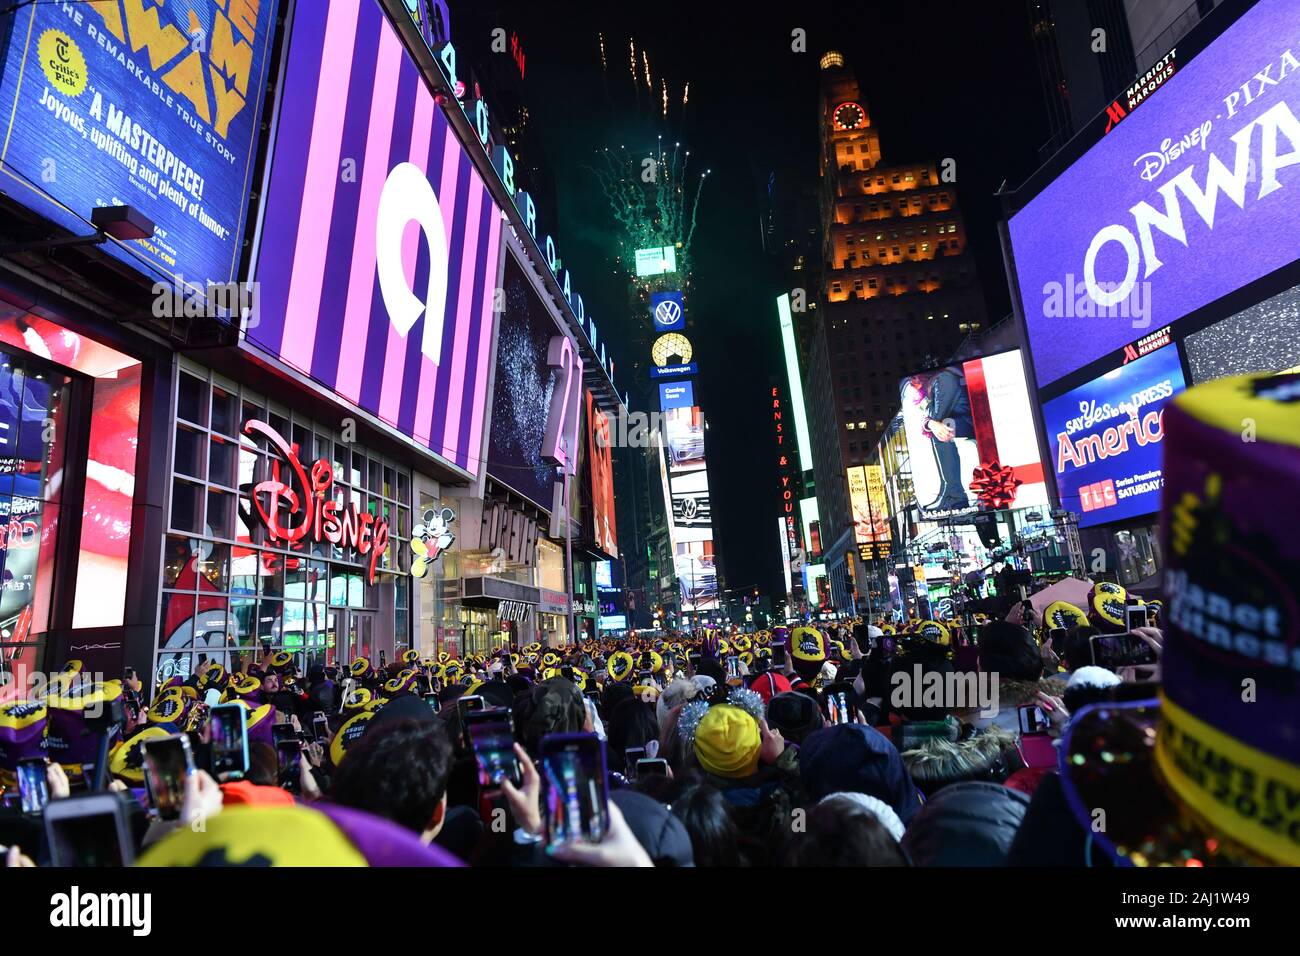 New Years Eve revelers are seen during the Times Square New Year's Eve 2020 Celebration on December 31, 2019 in New York City. Stock Photo